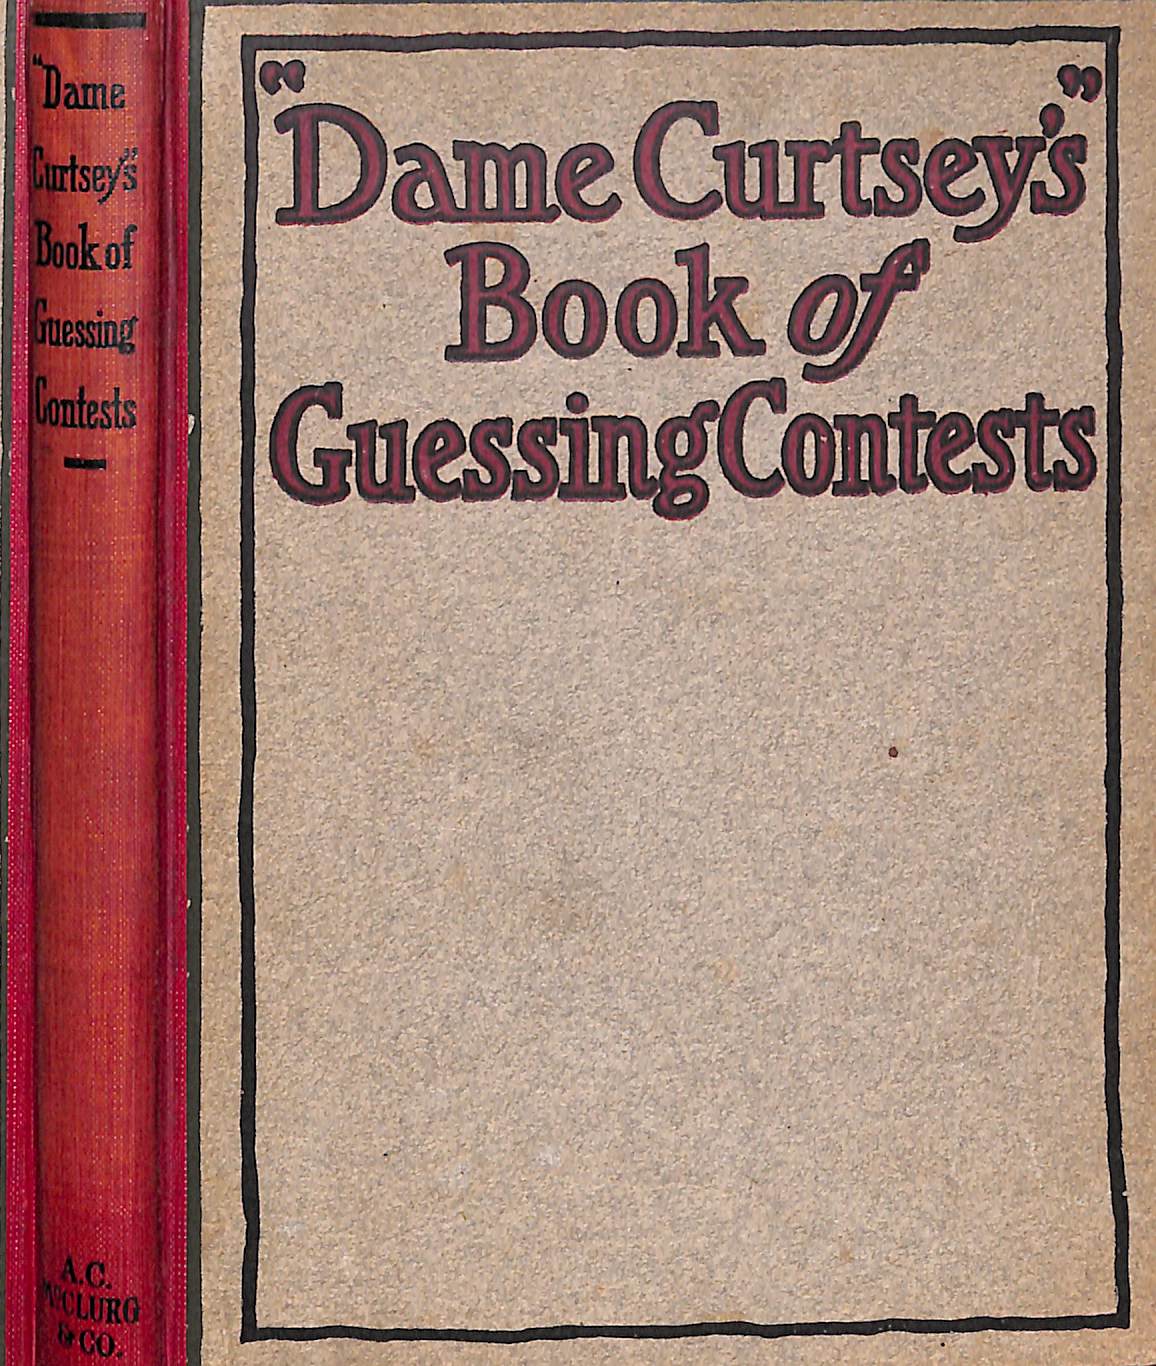 "Dame Curtsey's" Book Of Guessing Contests 1910 GLOVER, Ellye Howell